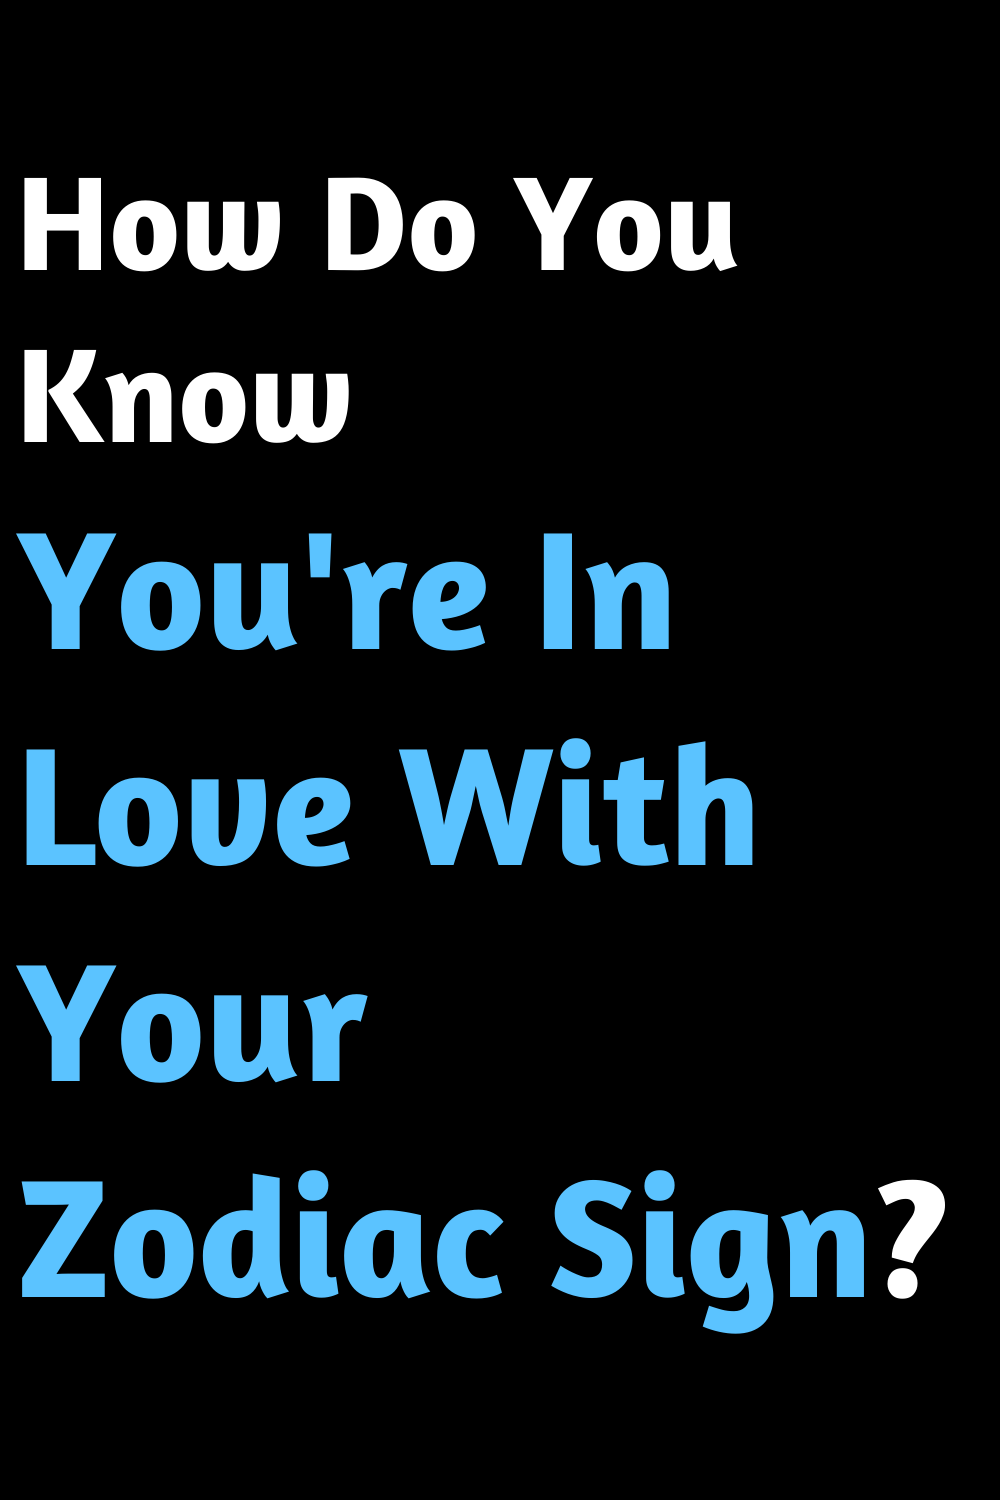 How Do You Know You're In Love With Your Zodiac Sign?